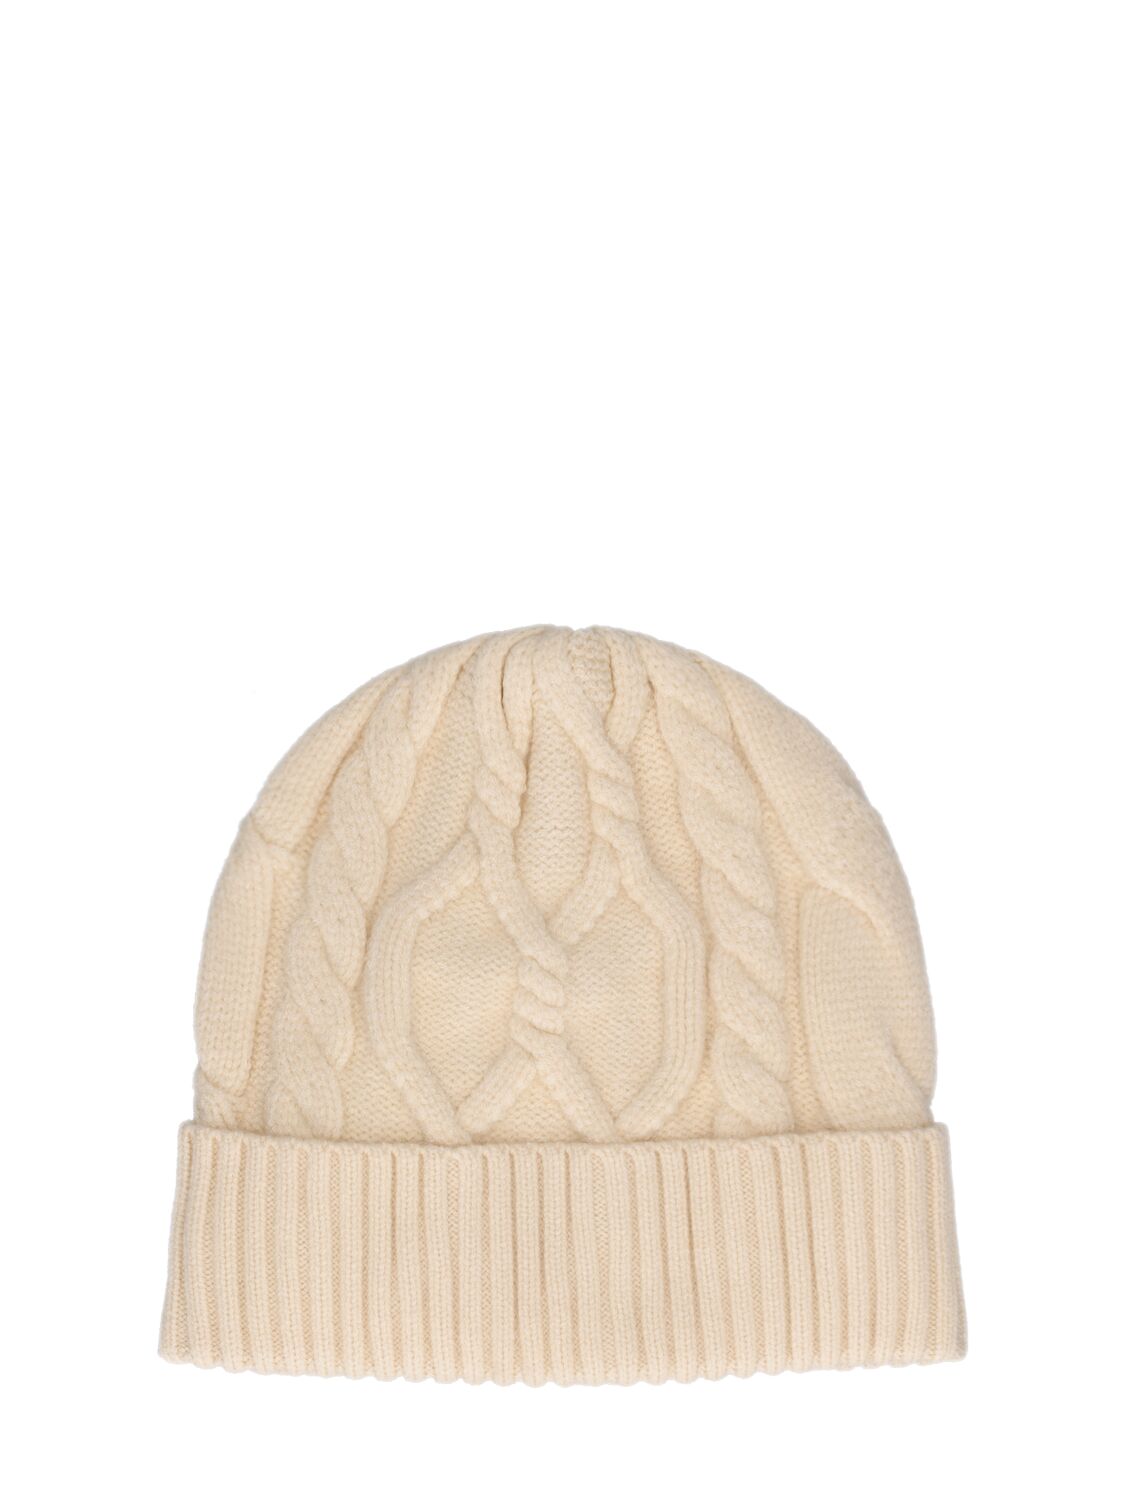 Image of Chamond Cable Knit Beanie